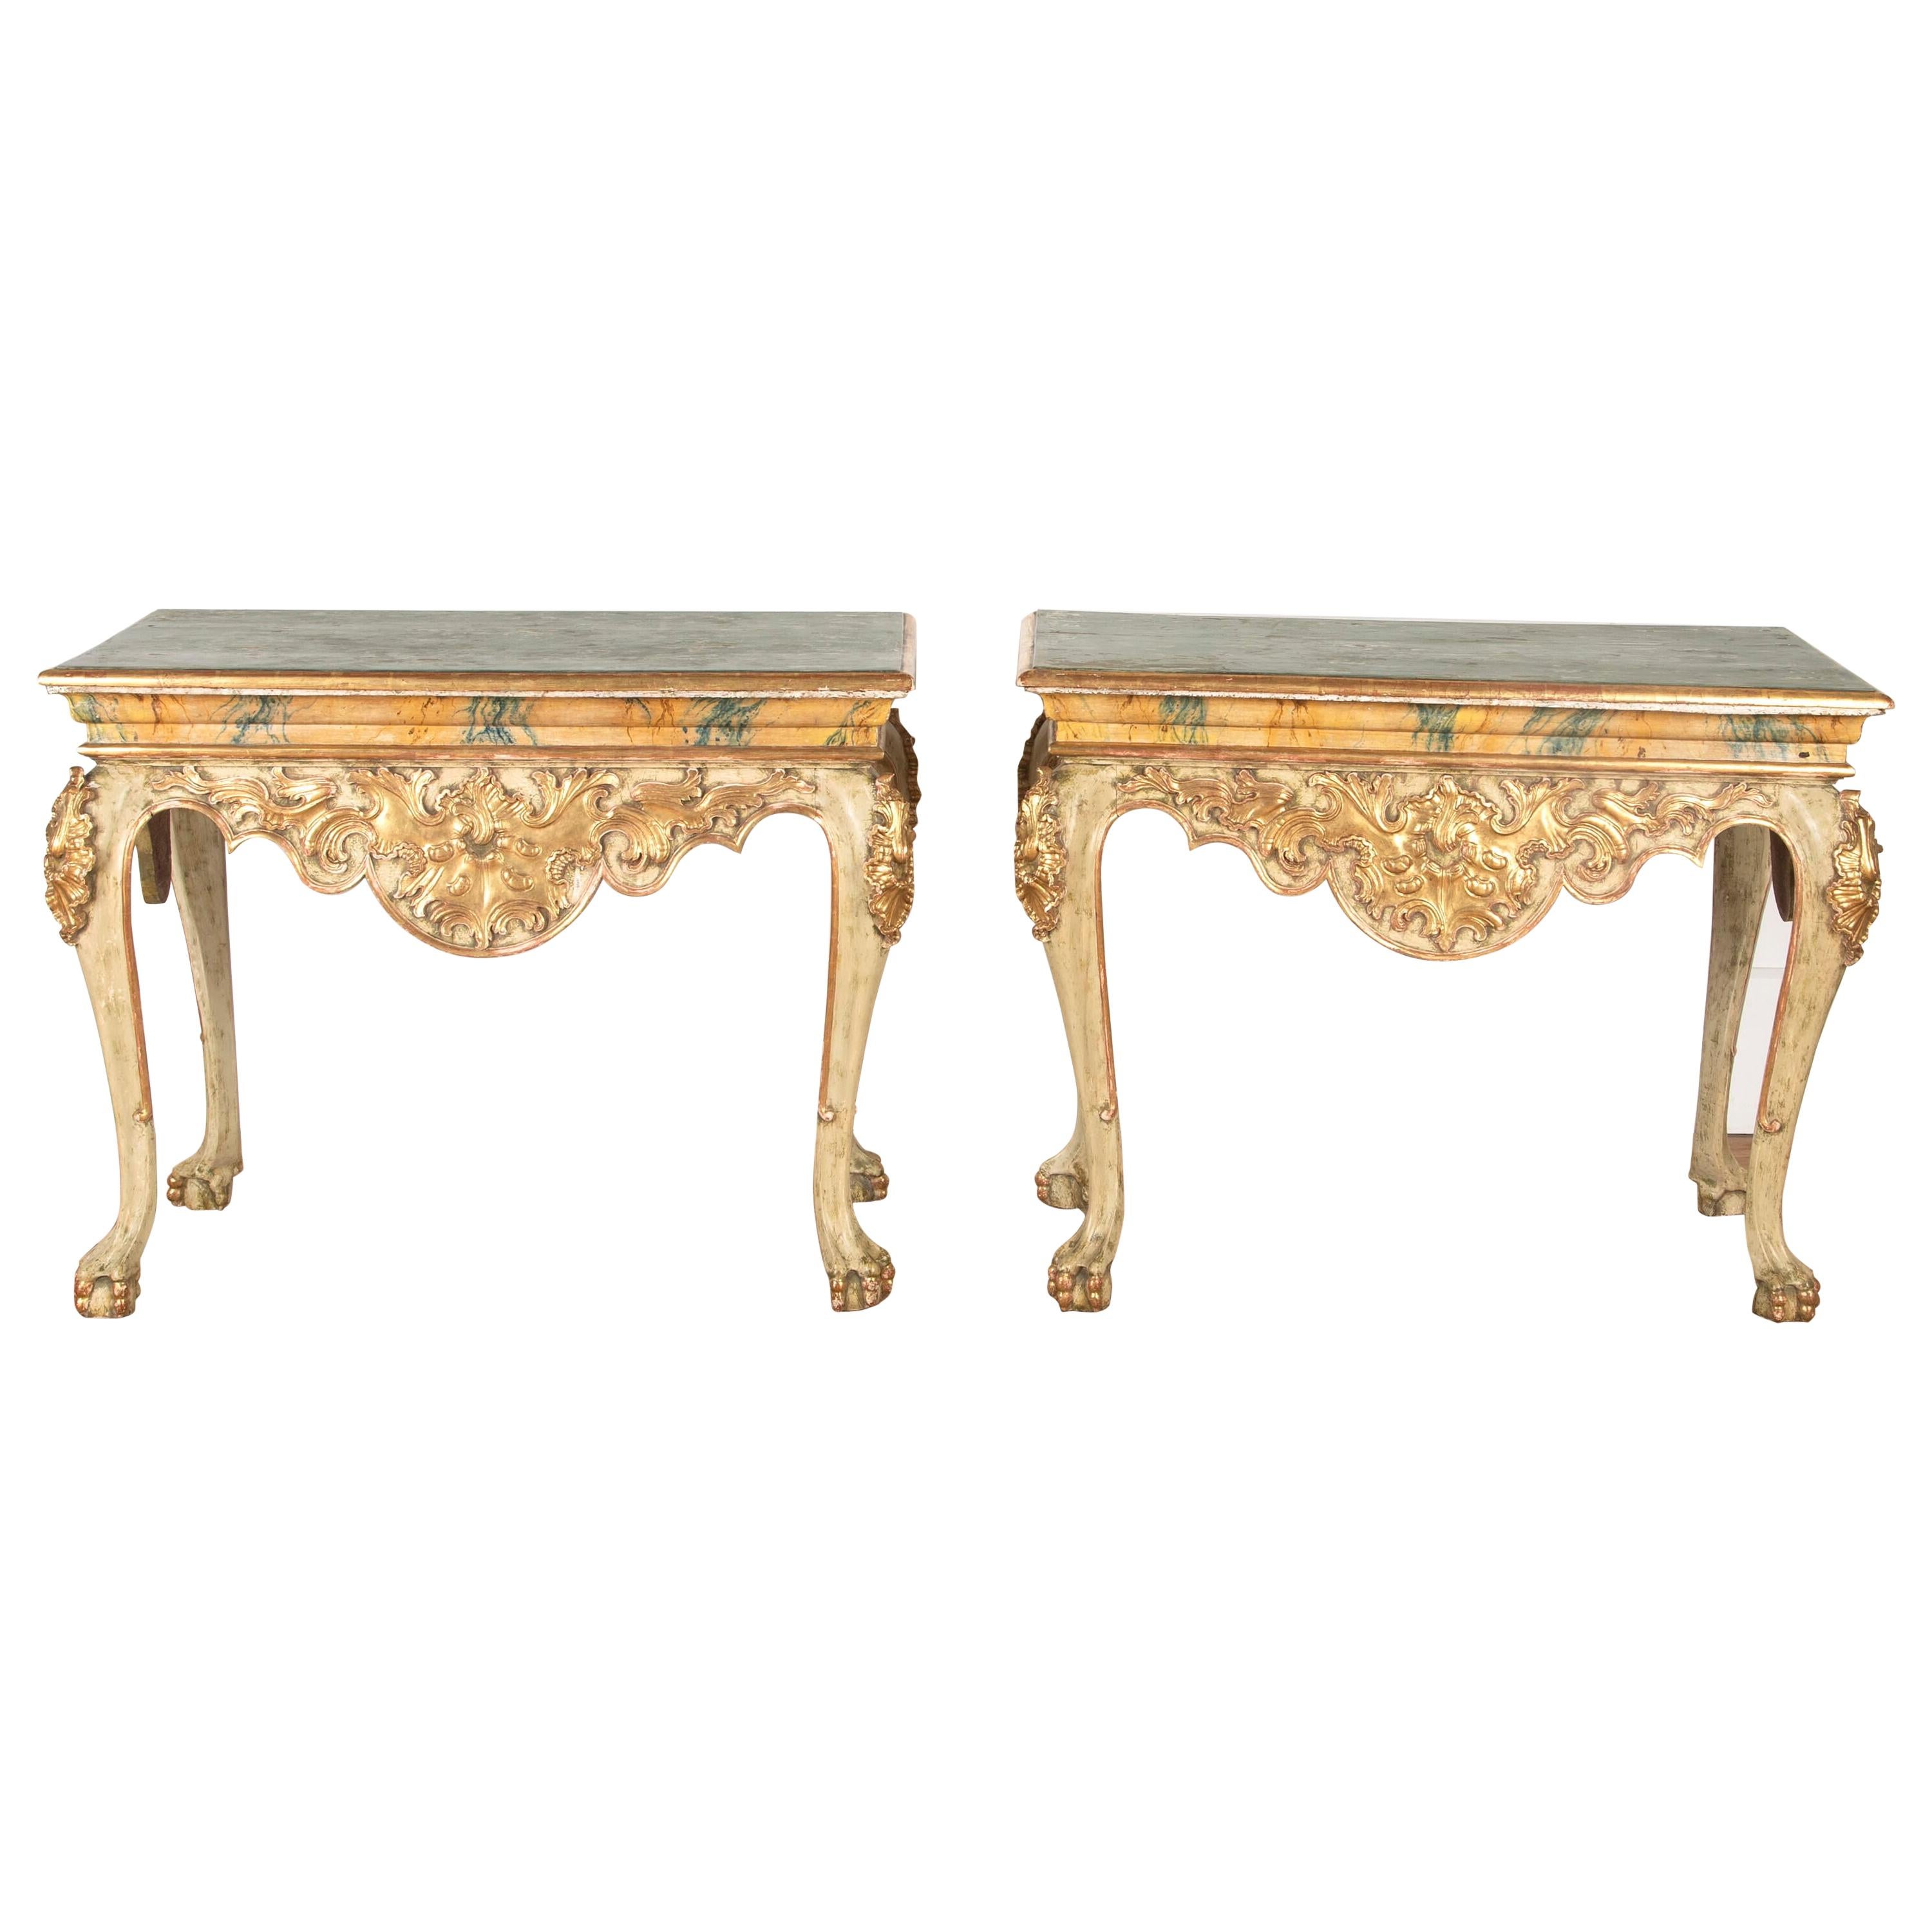 Excellent Pair of 19th Century, Gilded Consoles For Sale at 1stDibs